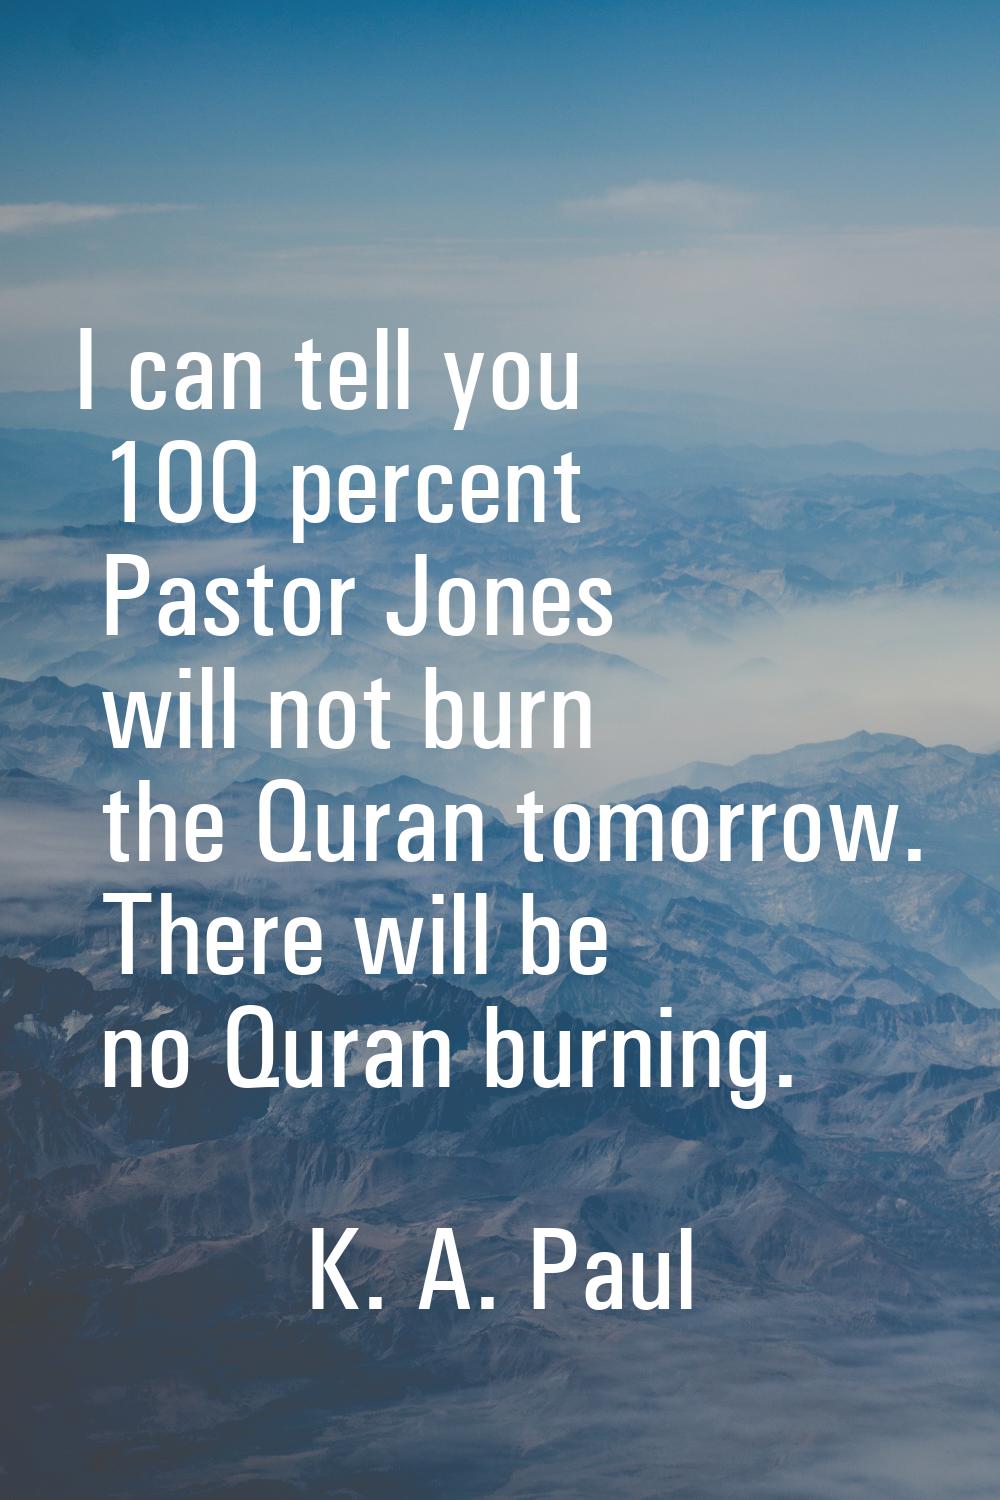 I can tell you 100 percent Pastor Jones will not burn the Quran tomorrow. There will be no Quran bu